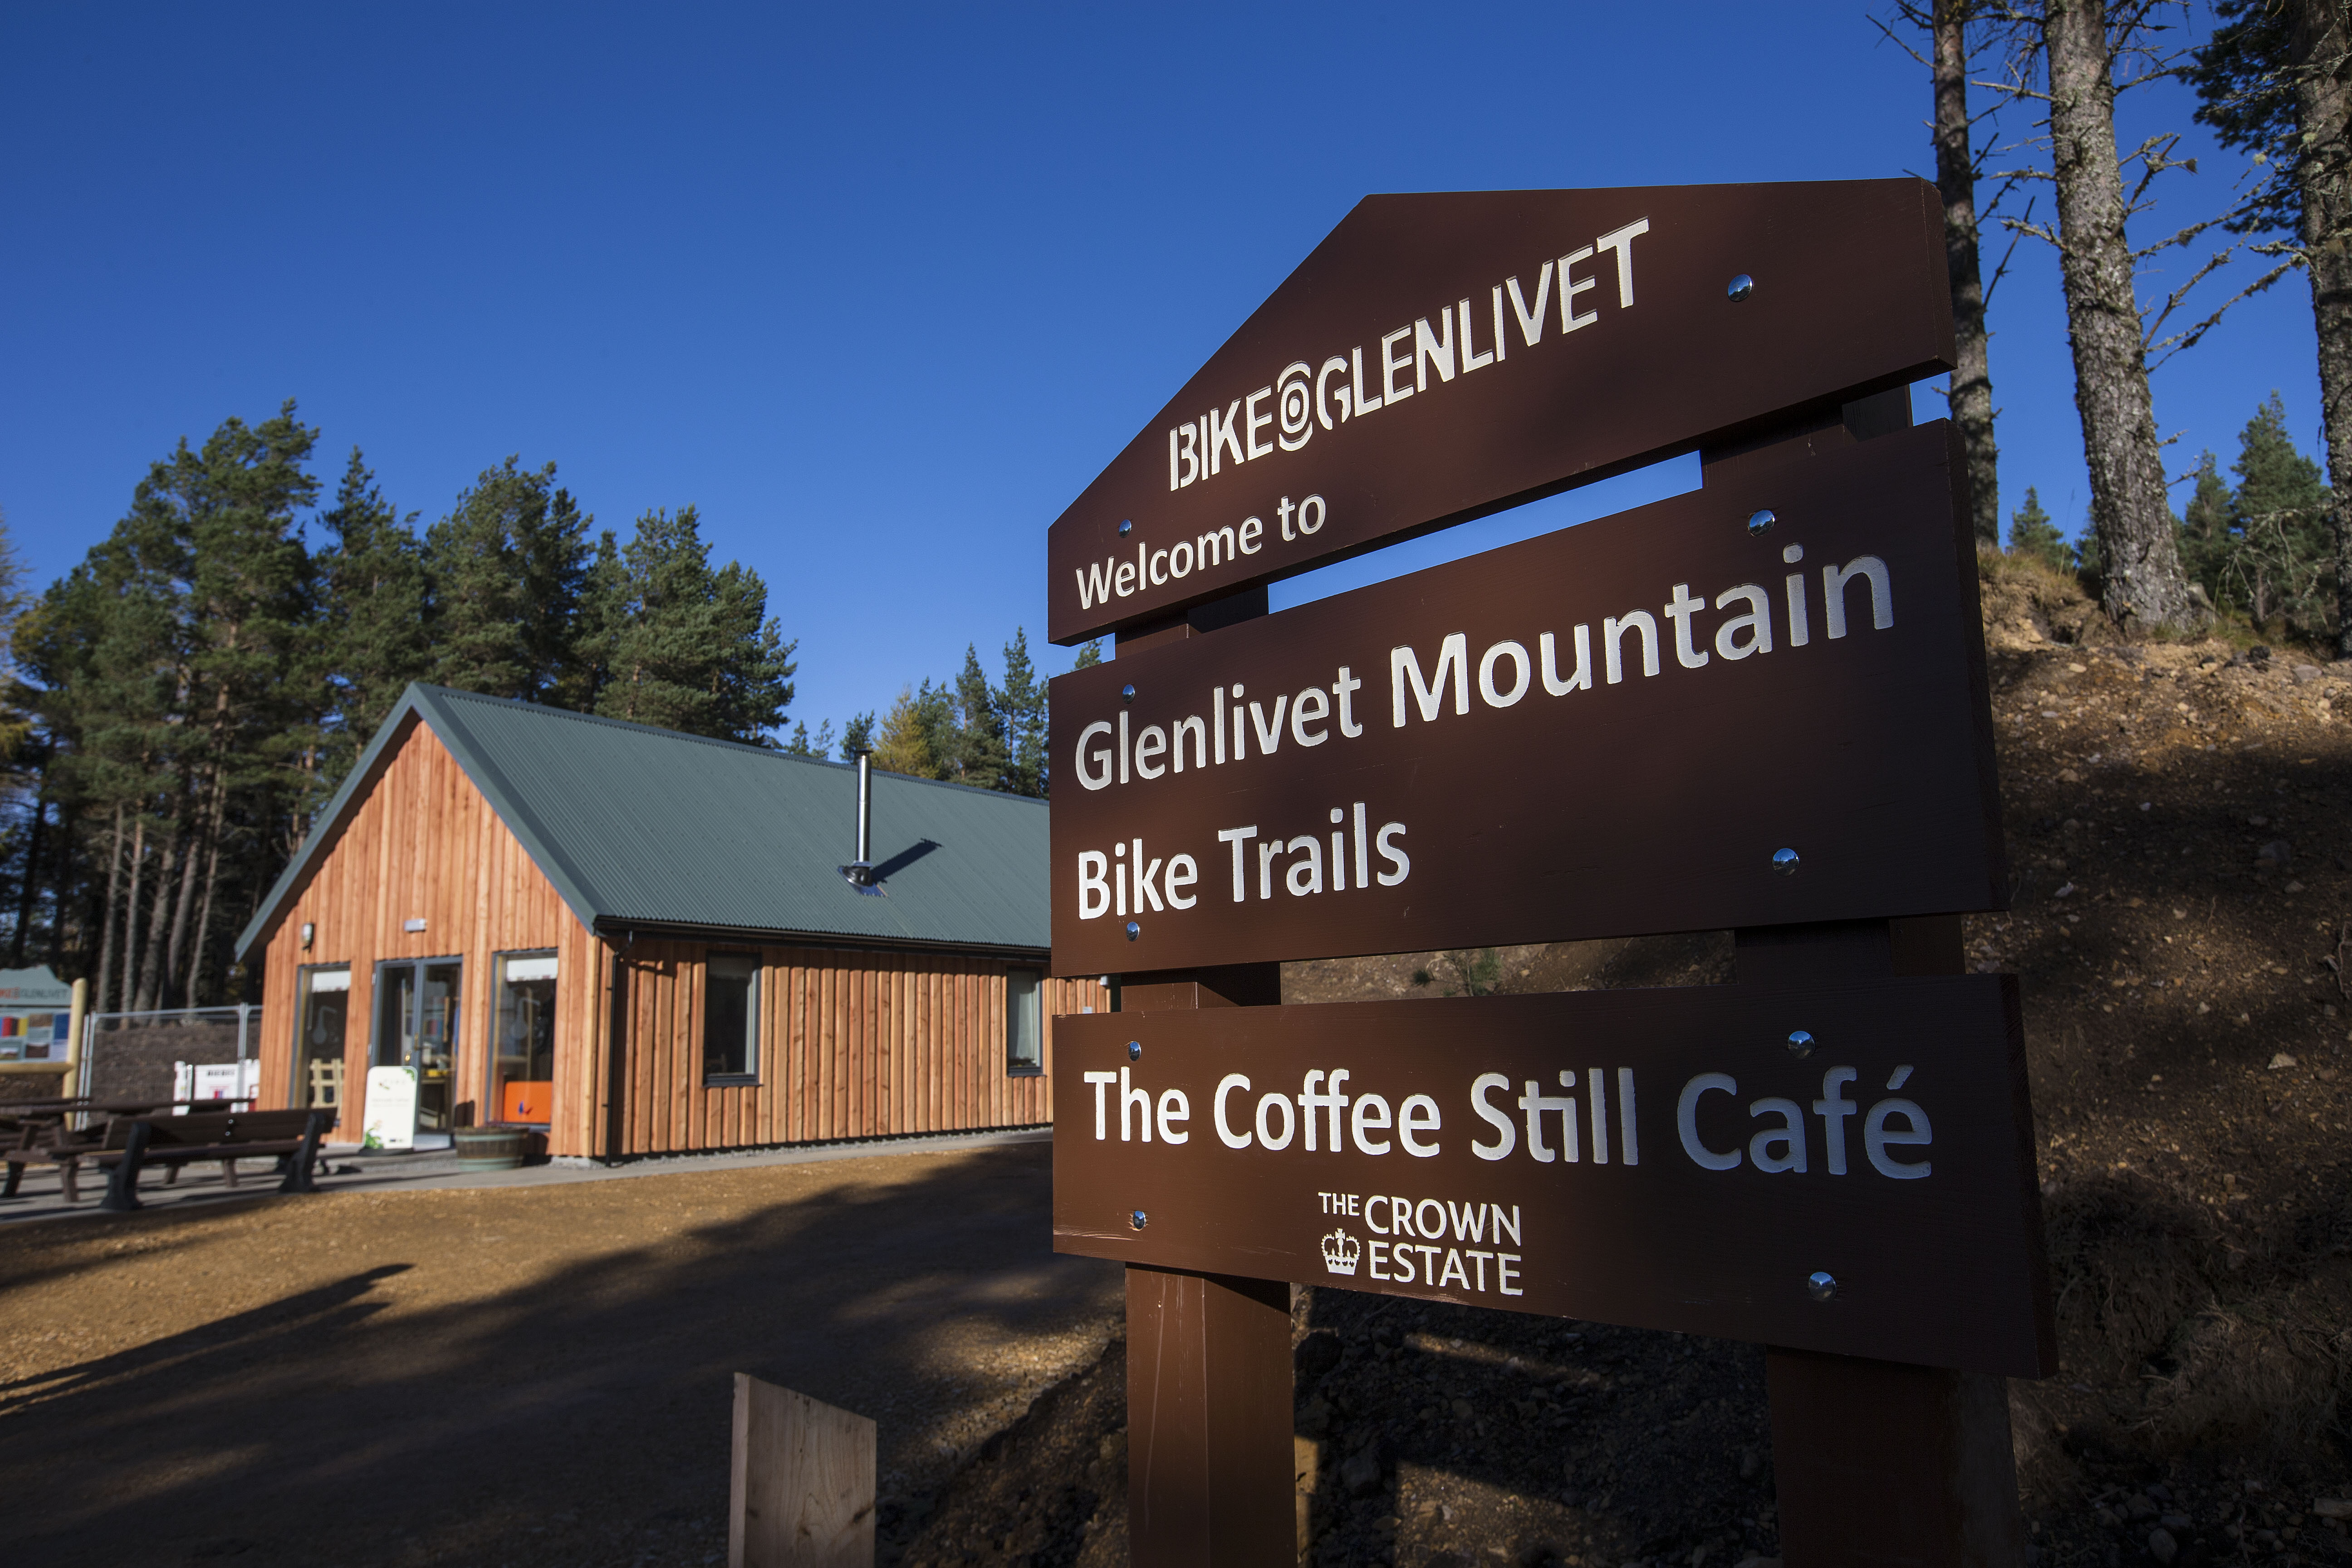 The growing appeal of the BikeGlenlivet cycling trails